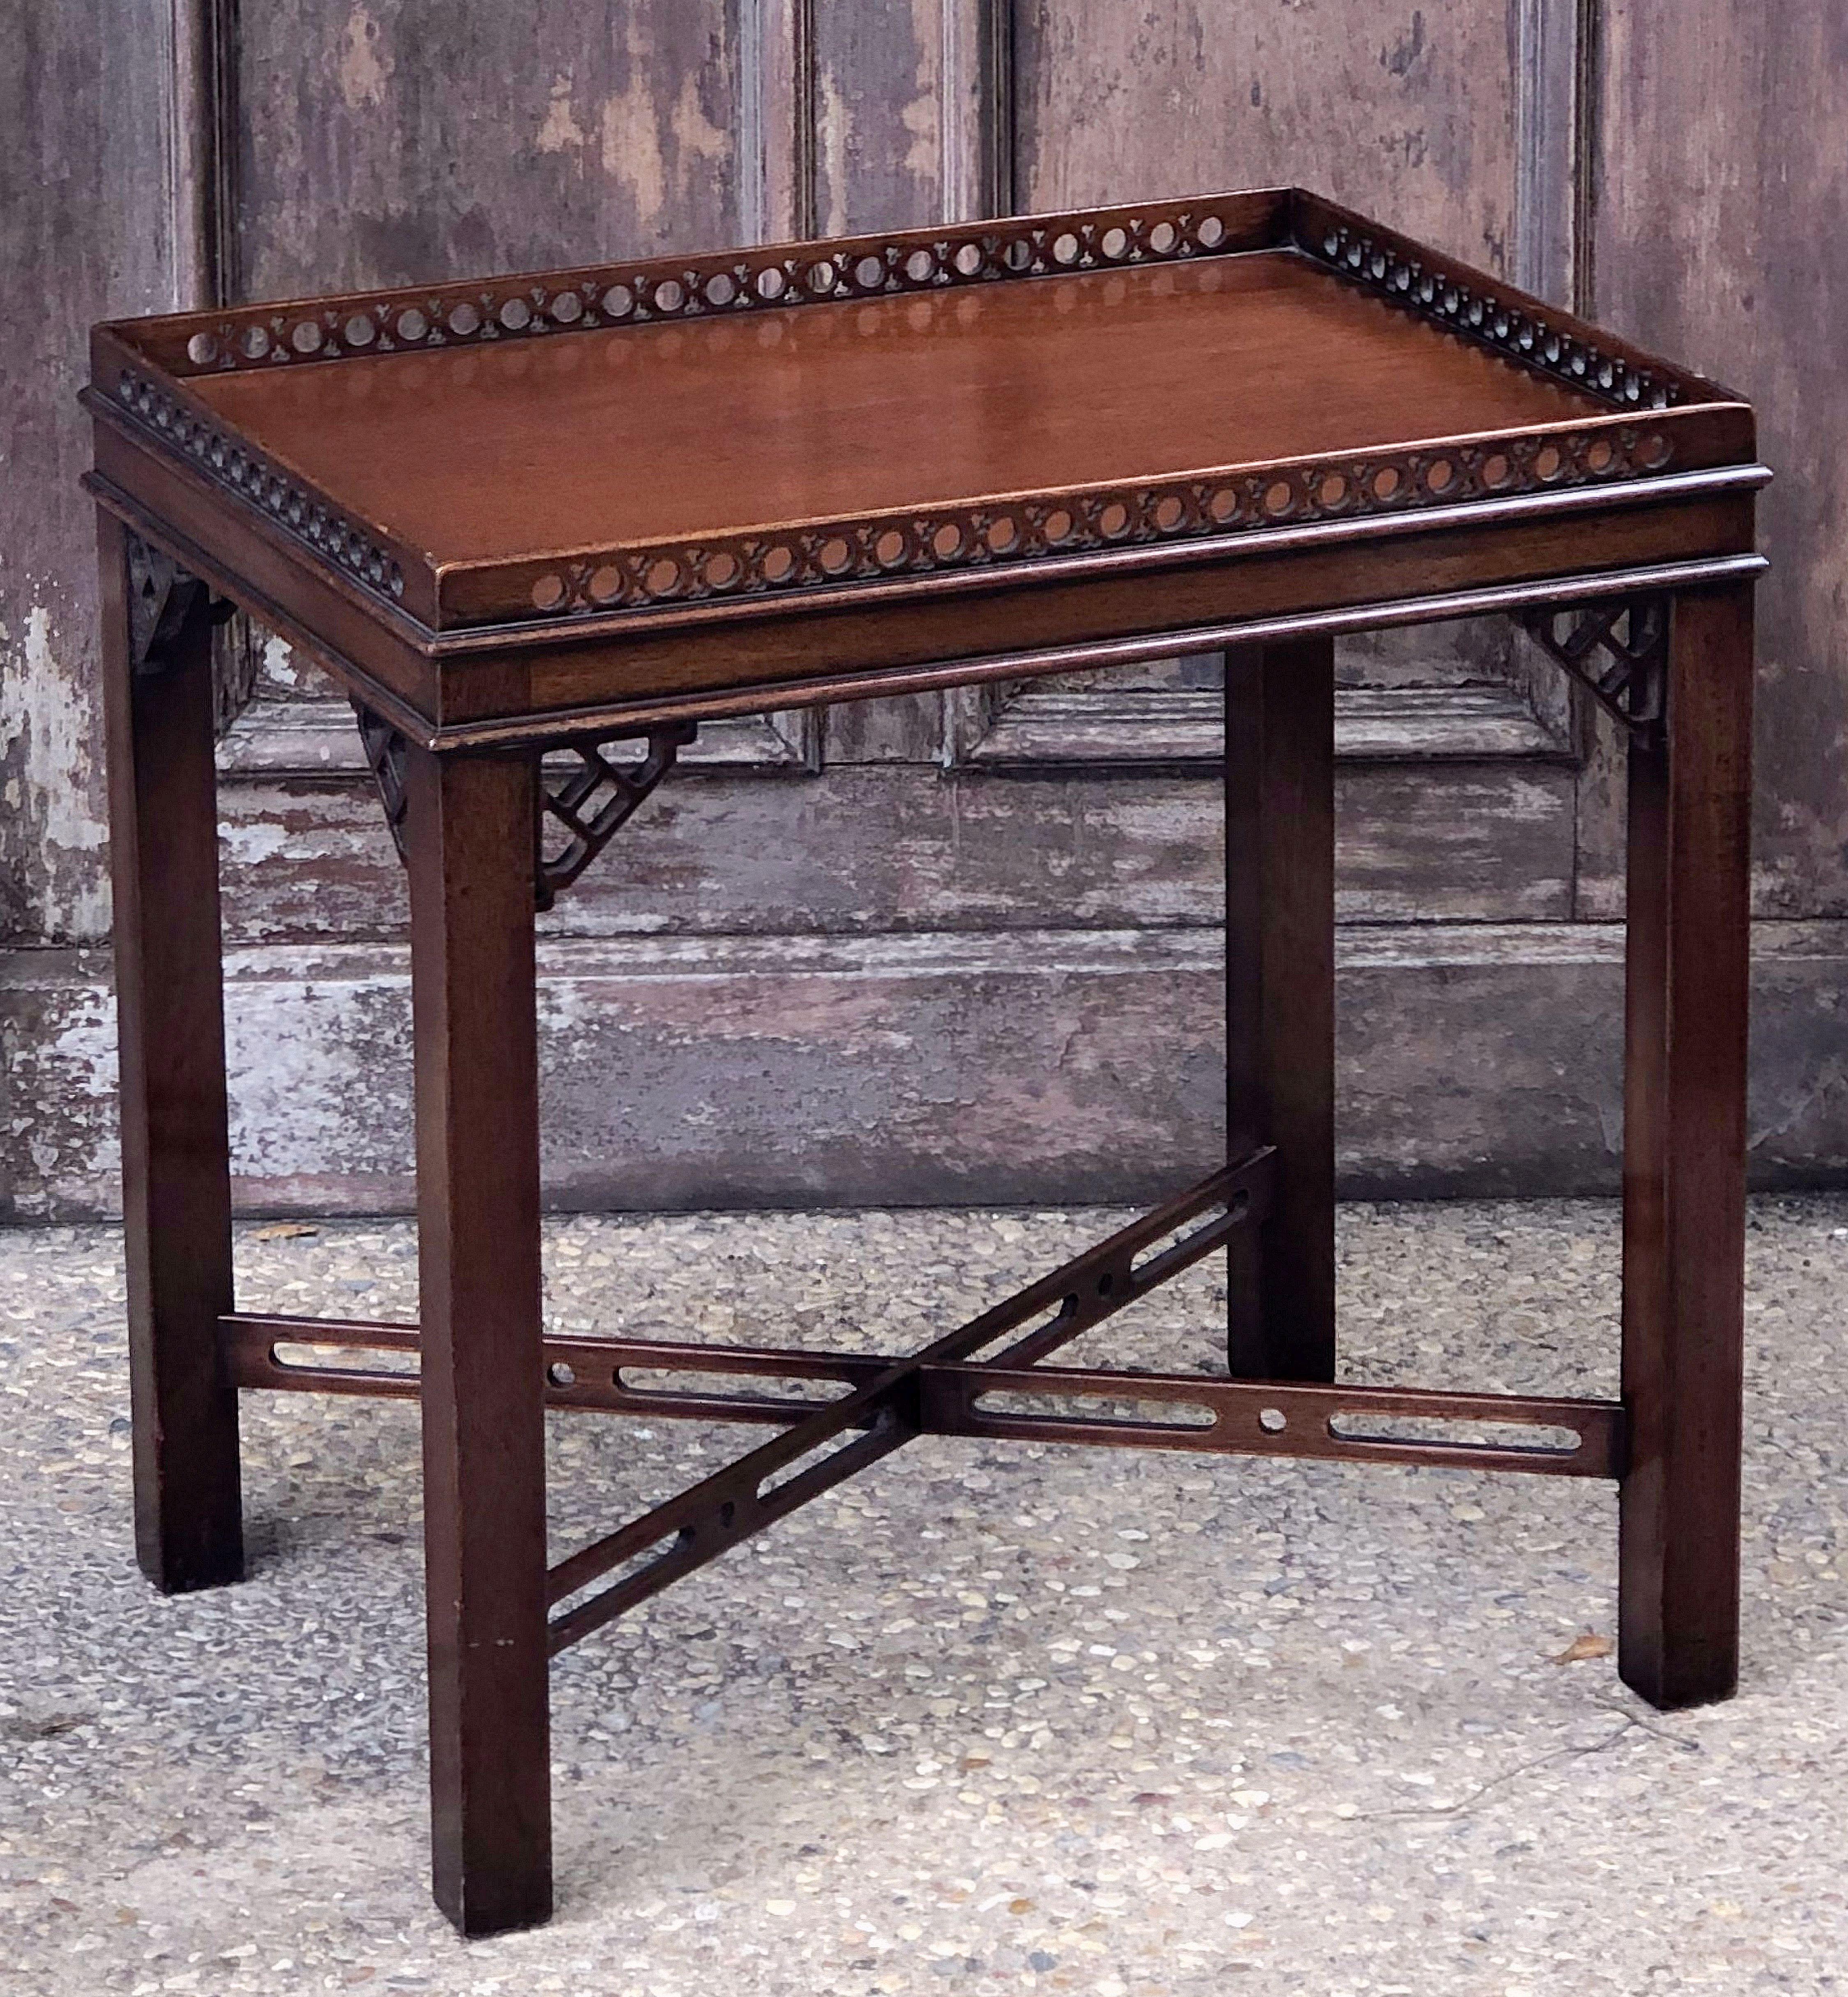 A fine English side, occasional, or end table of mahogany in the Chippendale style, featuring a rectangular carved or pierced gallery rail top over a frieze of four straight legs, braced with crossbar stretcher and decorative fretwork corner